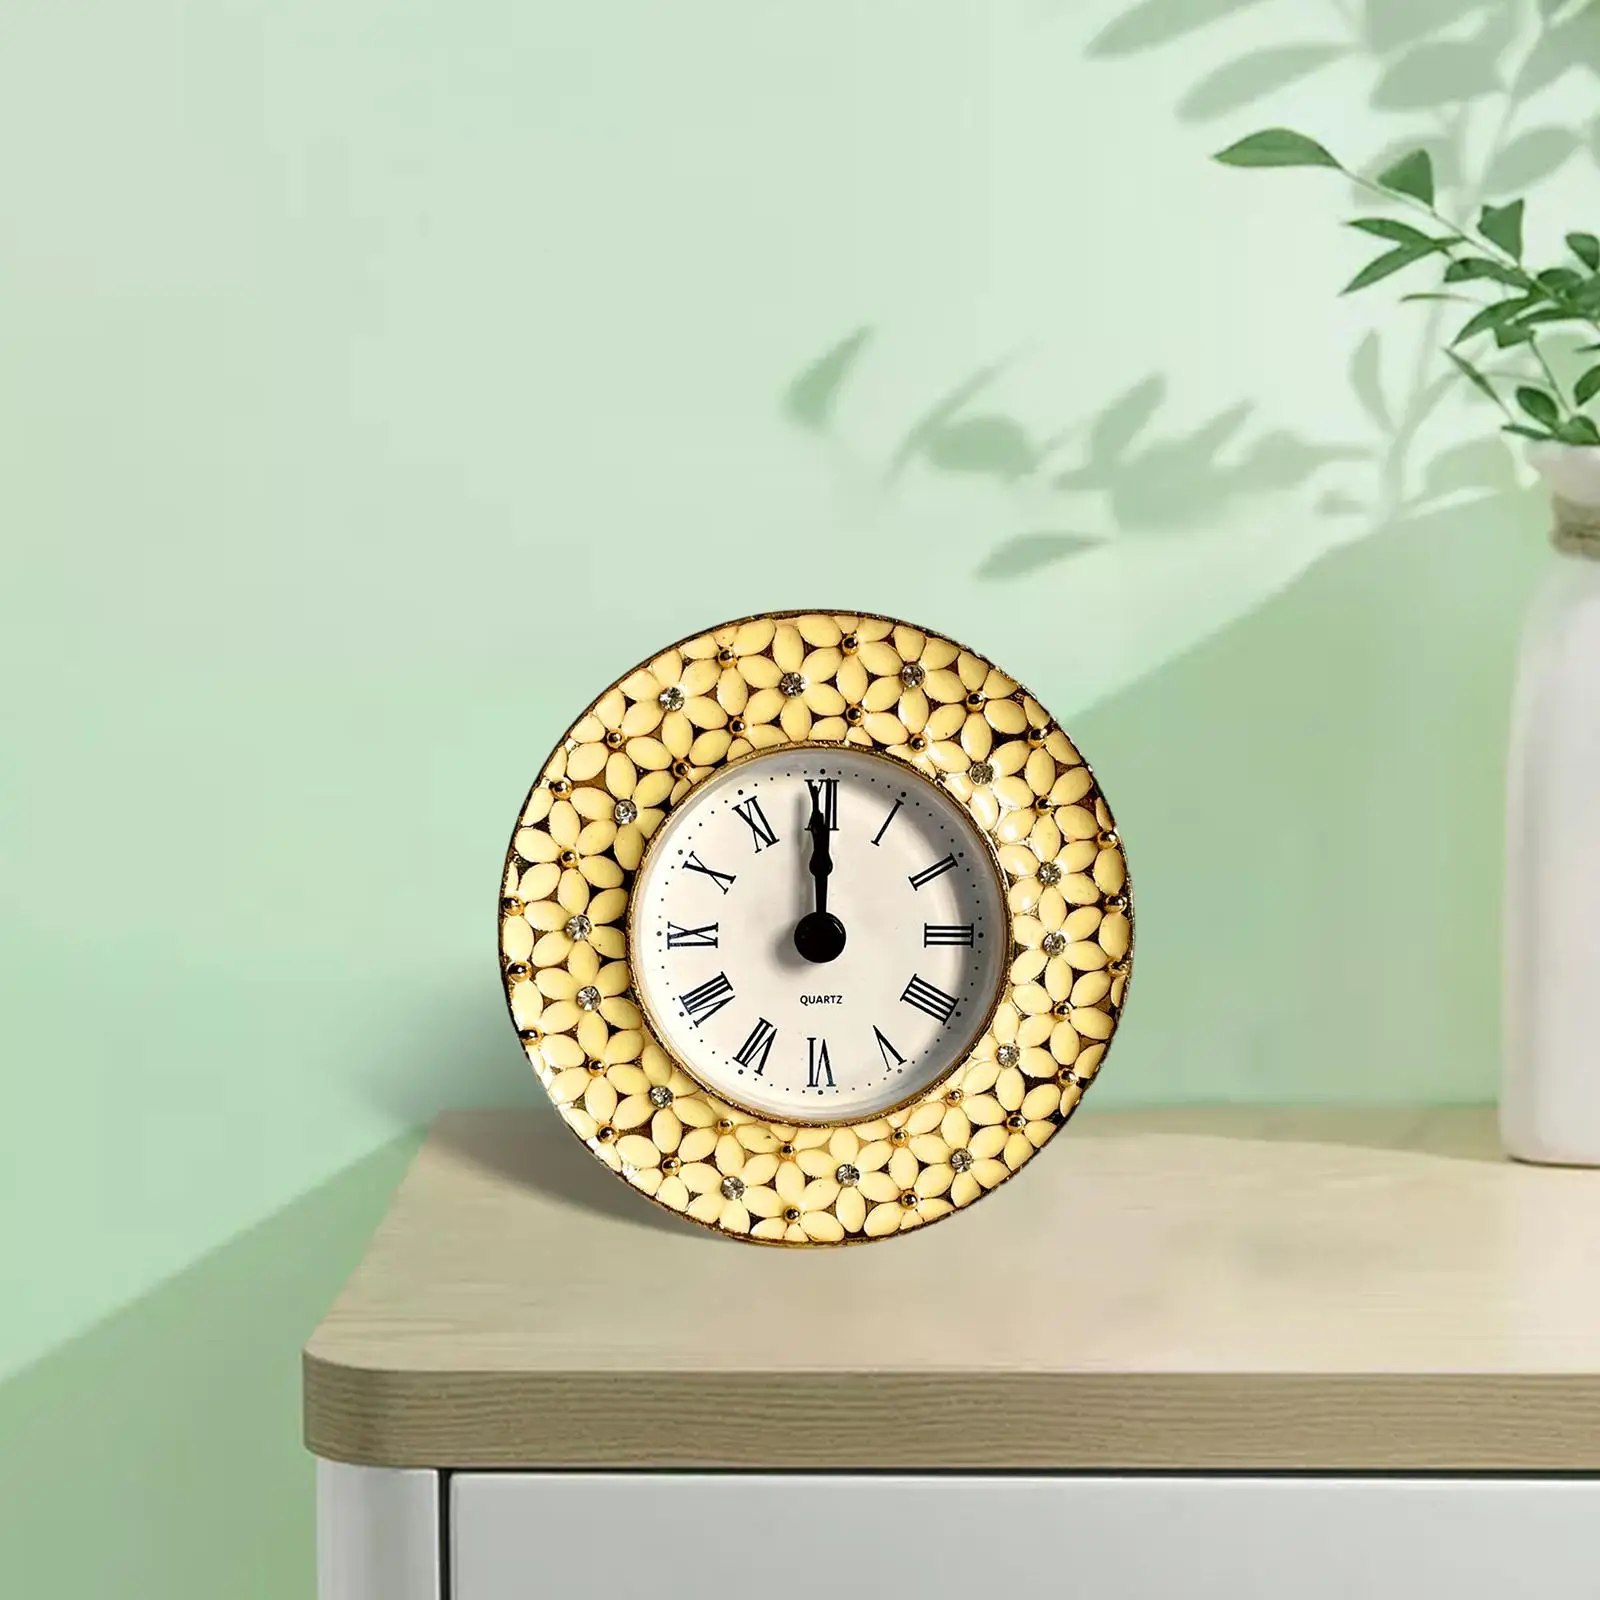 Retro Alarm Clock Silent Classic Battery Operated Metal Gold Table Clock Ornament Bedside Clocks for Study Accessories Cafe Home